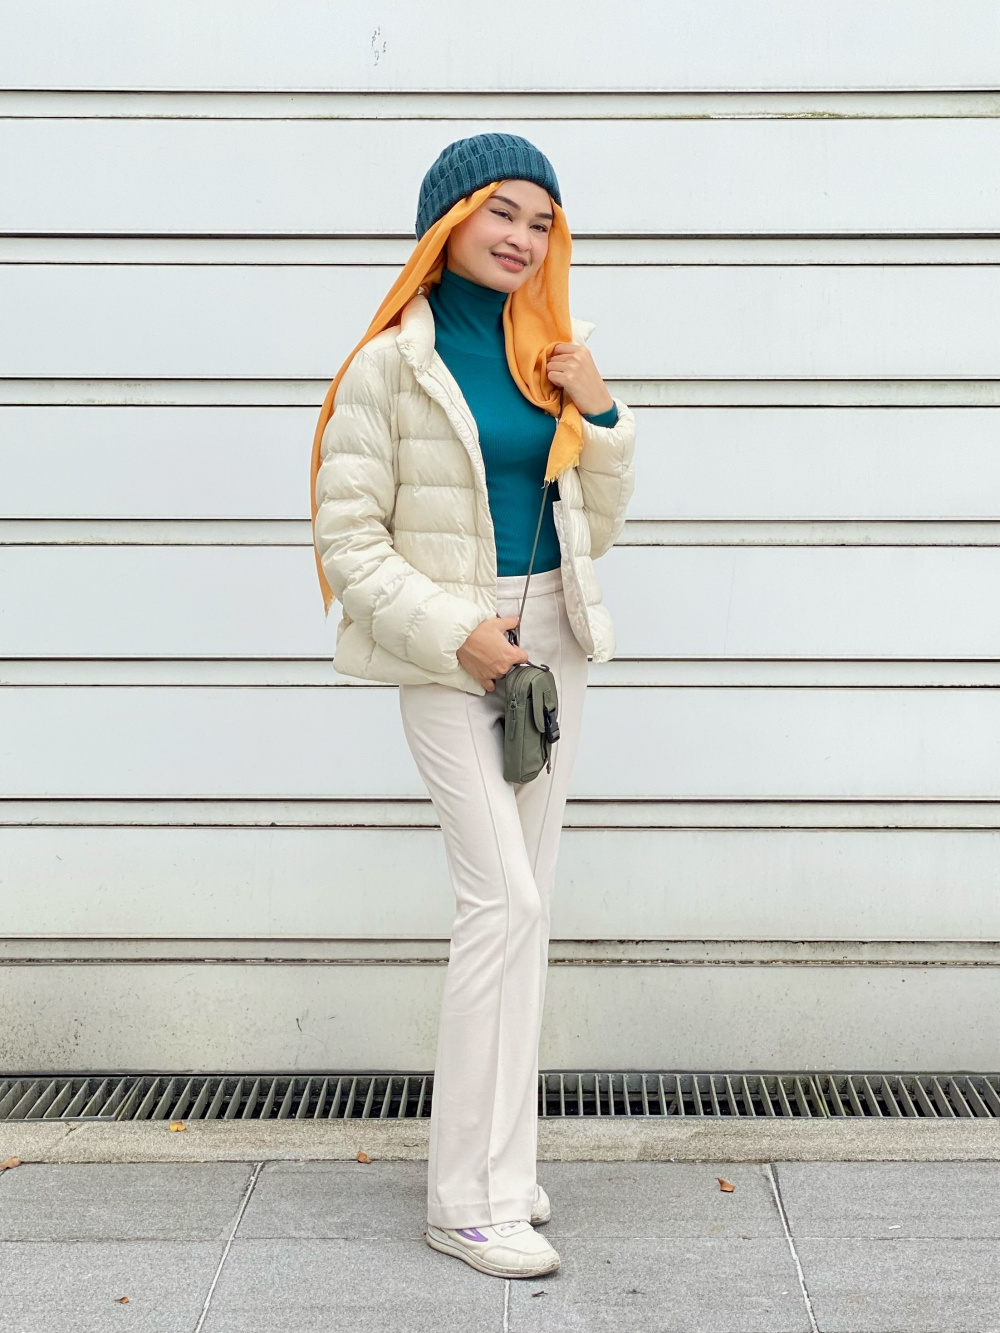 Check styling ideas for「ULTRA LIGHT DOWN SHINY PUFFER JACKET、HEATTECH EXTRA  STRETCH HIGH RISE LEGGINGS PANTS」